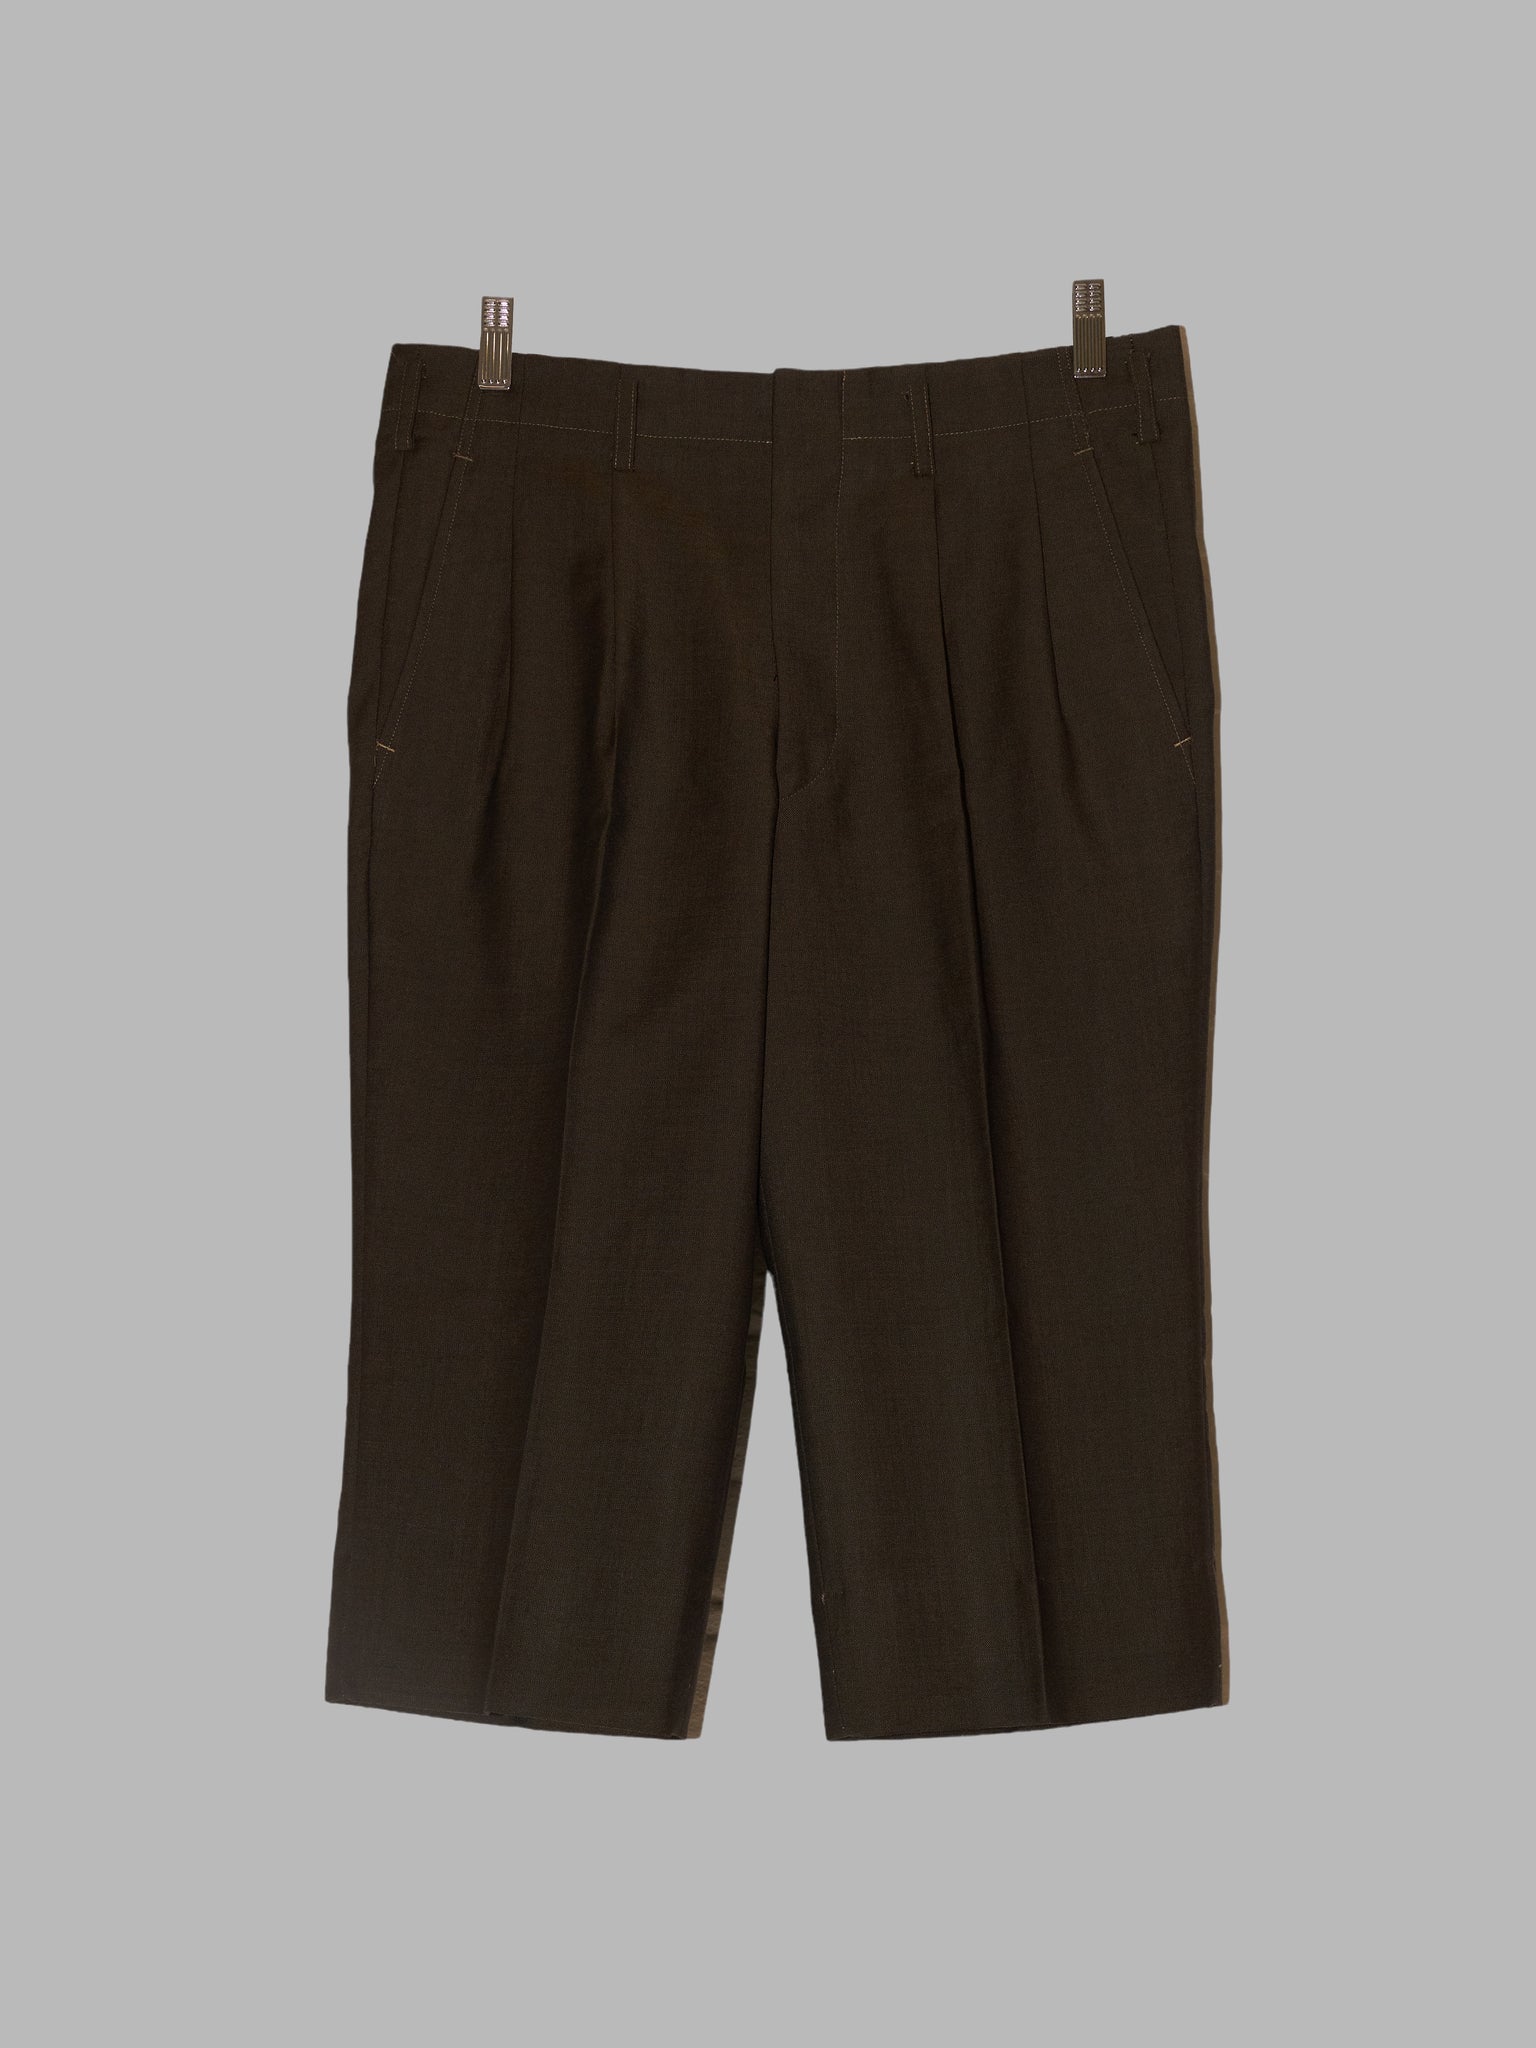 Comme des Garcons 1994 dark khaki brown wool cropped trousers - M